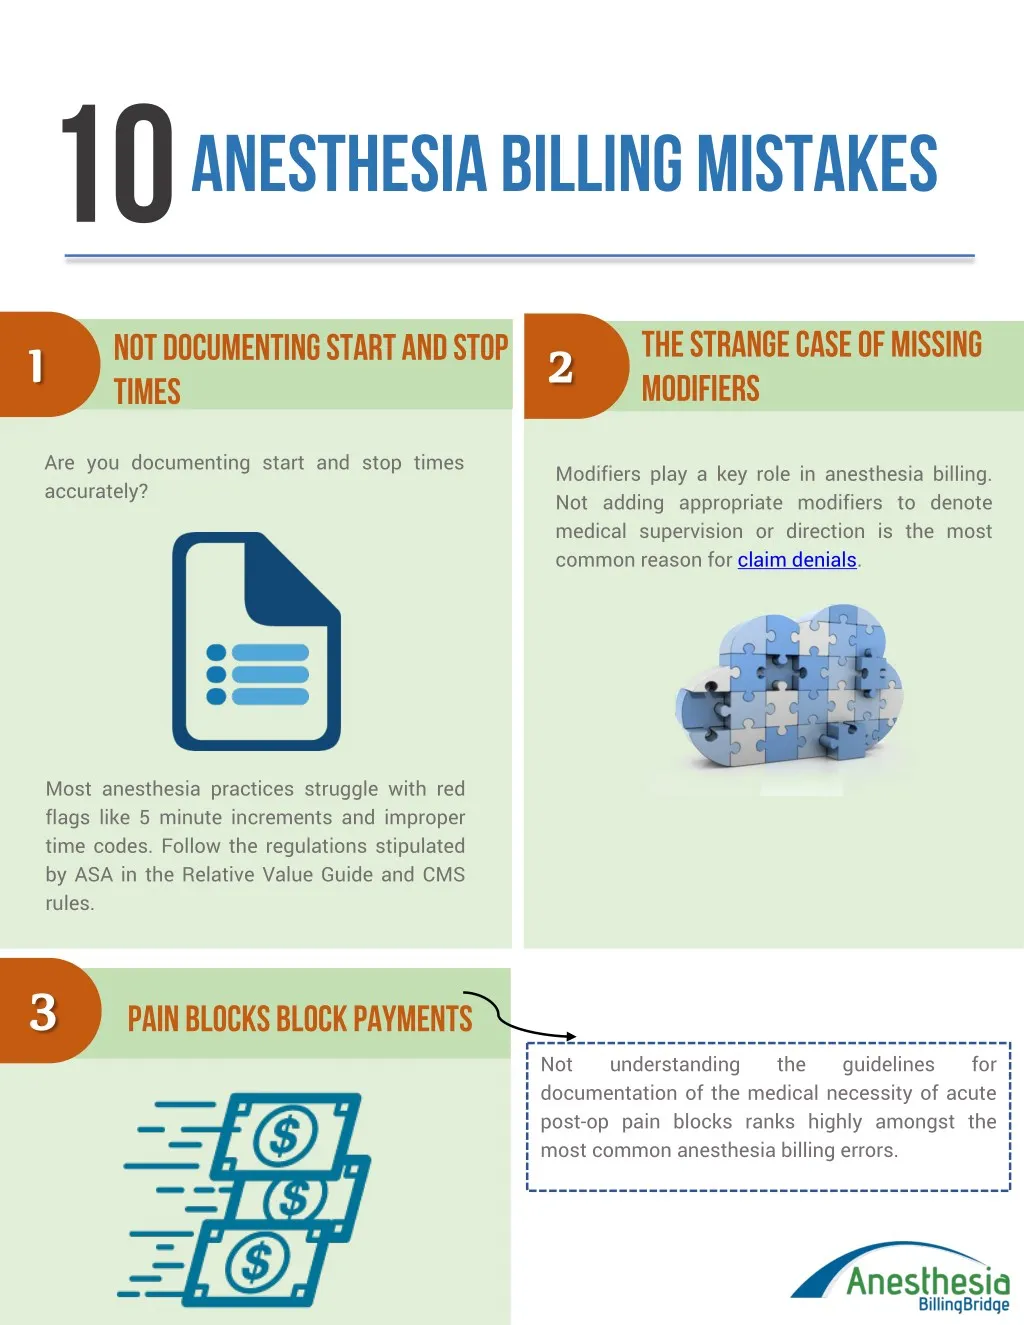 10 anesthesia billing mistakes